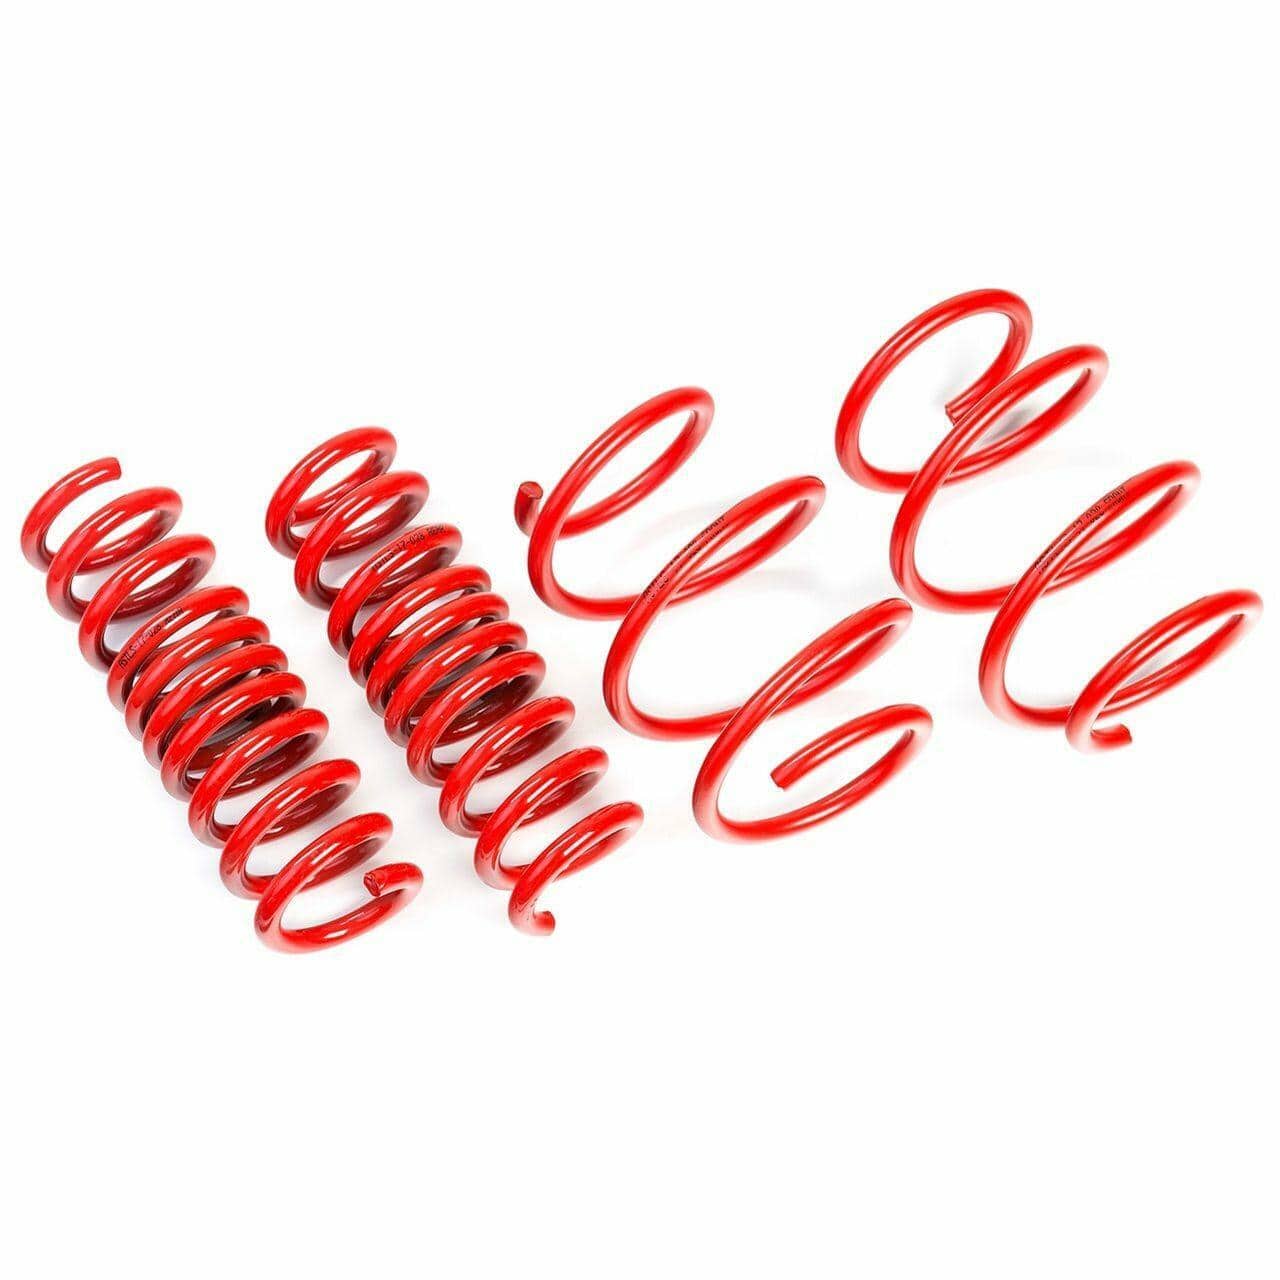 AST Suspension Lowering Springs (50MM/20MM TUV) - 1990-1998 BMW 3 Series 316i/318i/318TDS Compact/Coupe (E36) ASTLS-14-350